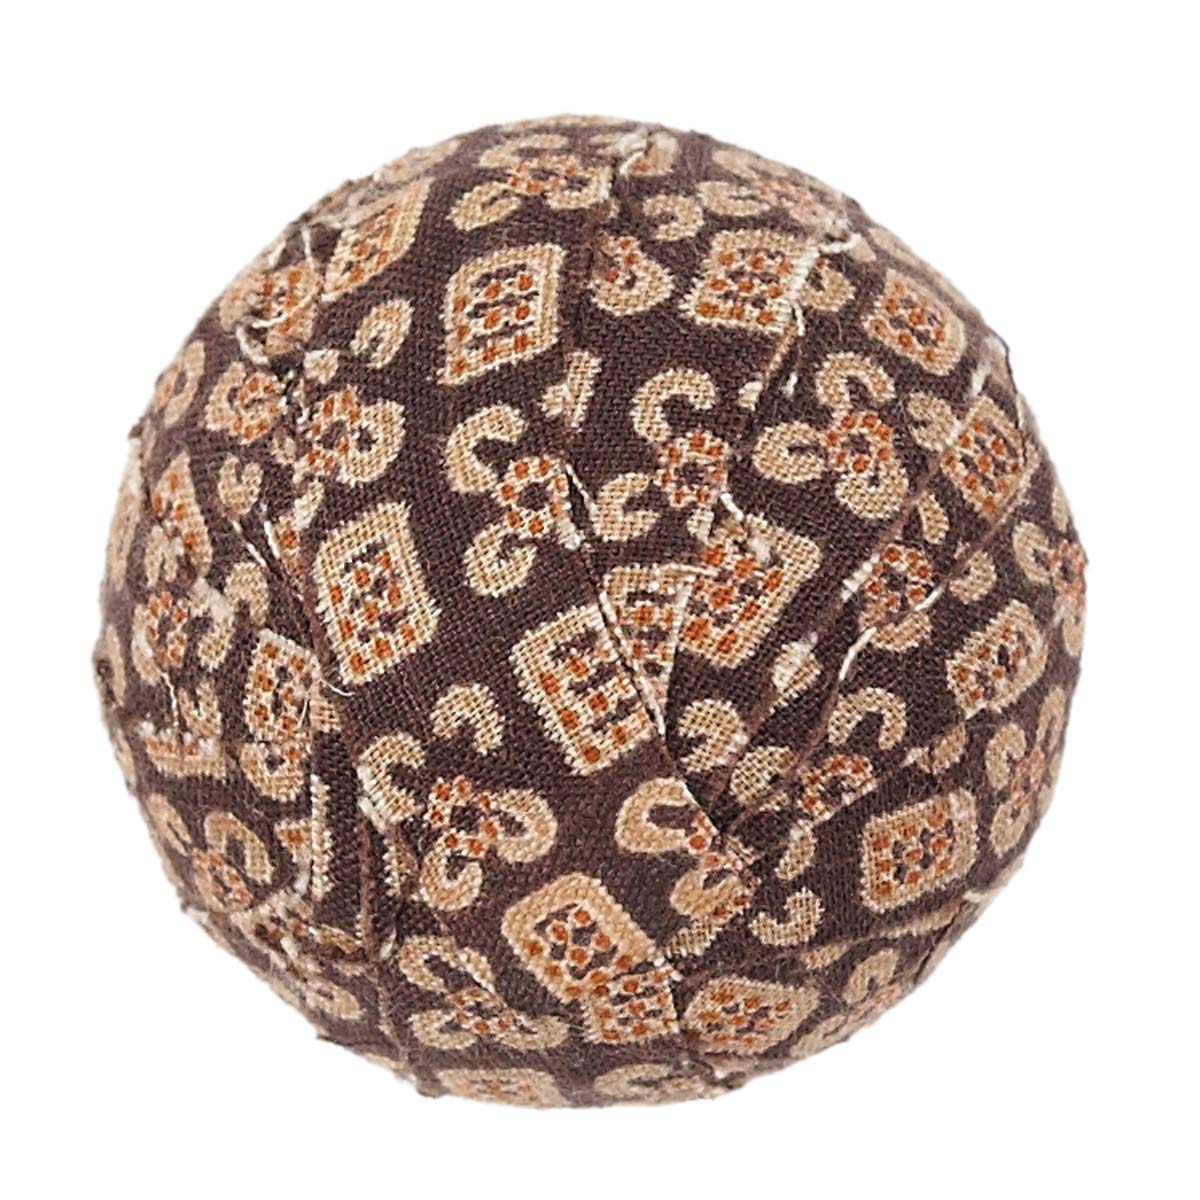 Tacoma Fabric Ball #10-1.5" Set of 6 VHC Brands